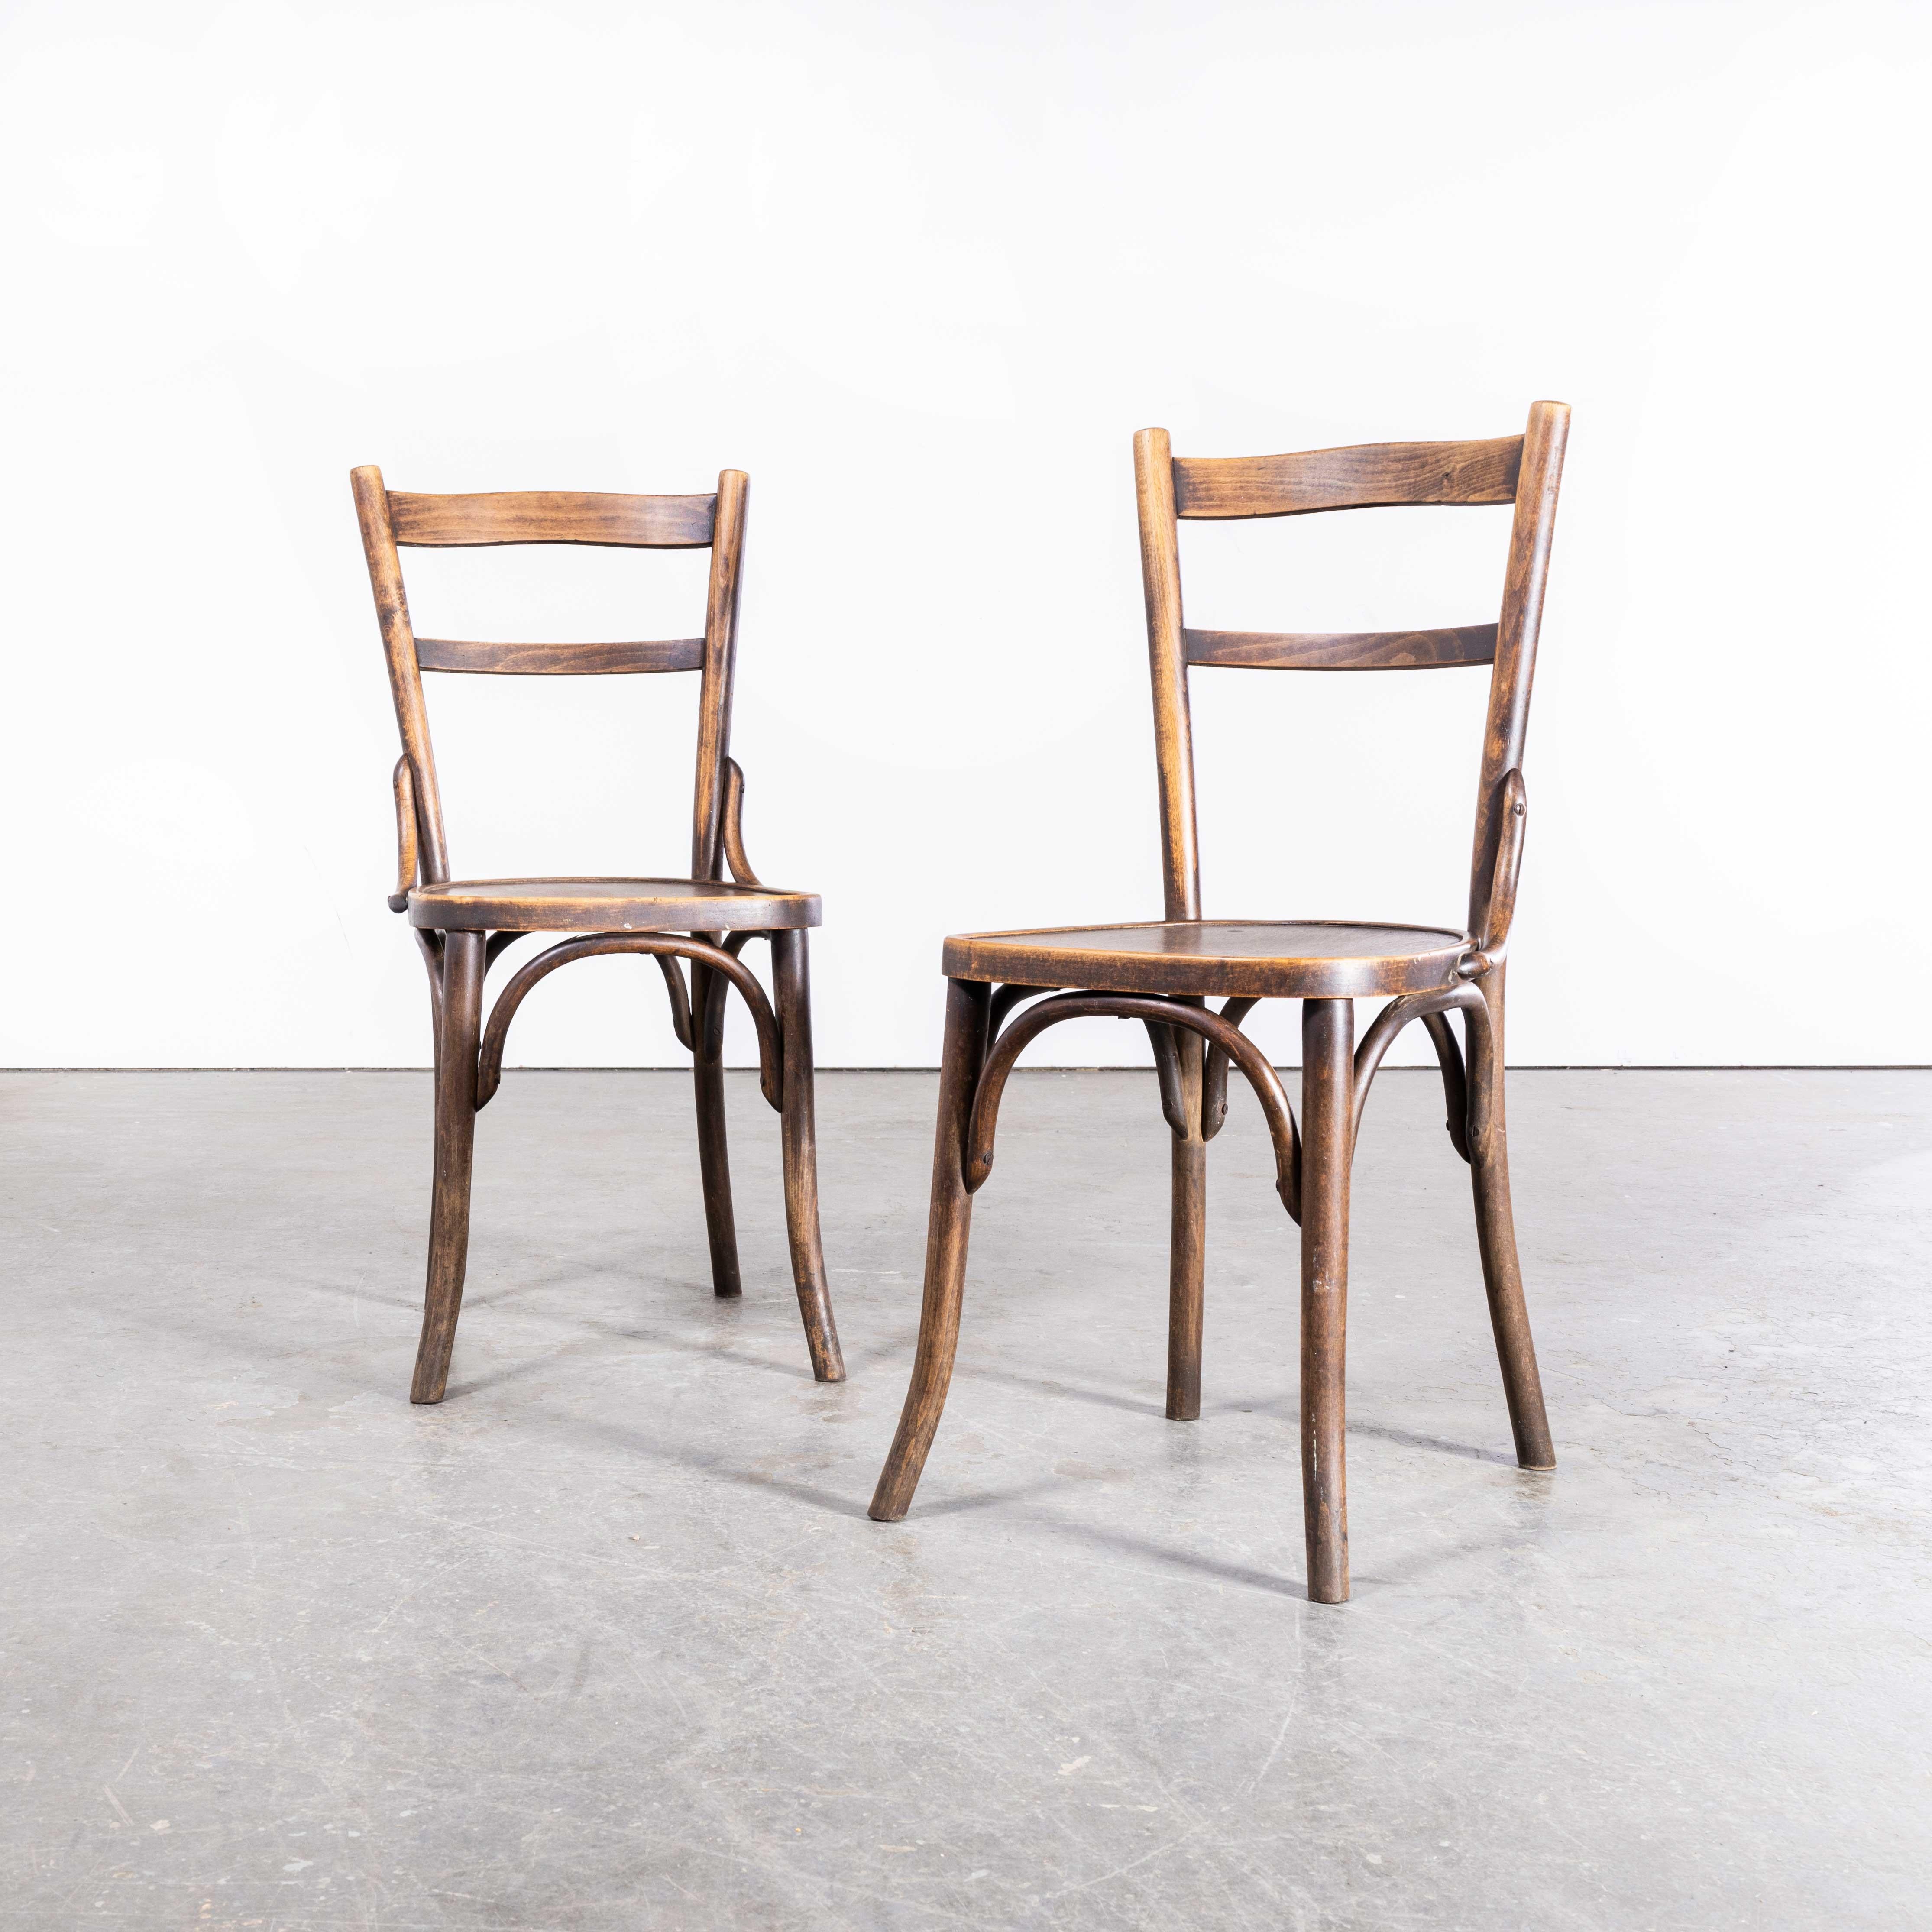 1920s Bentwood Debrecen Ladder Back Dining Chairs – Pair
1920s Bentwood Debrecen Ladder Back Dining Chairs – Pair. It is hard to be precise about the origin of these chairs as little history is known, but what we do know is at the beginning of the